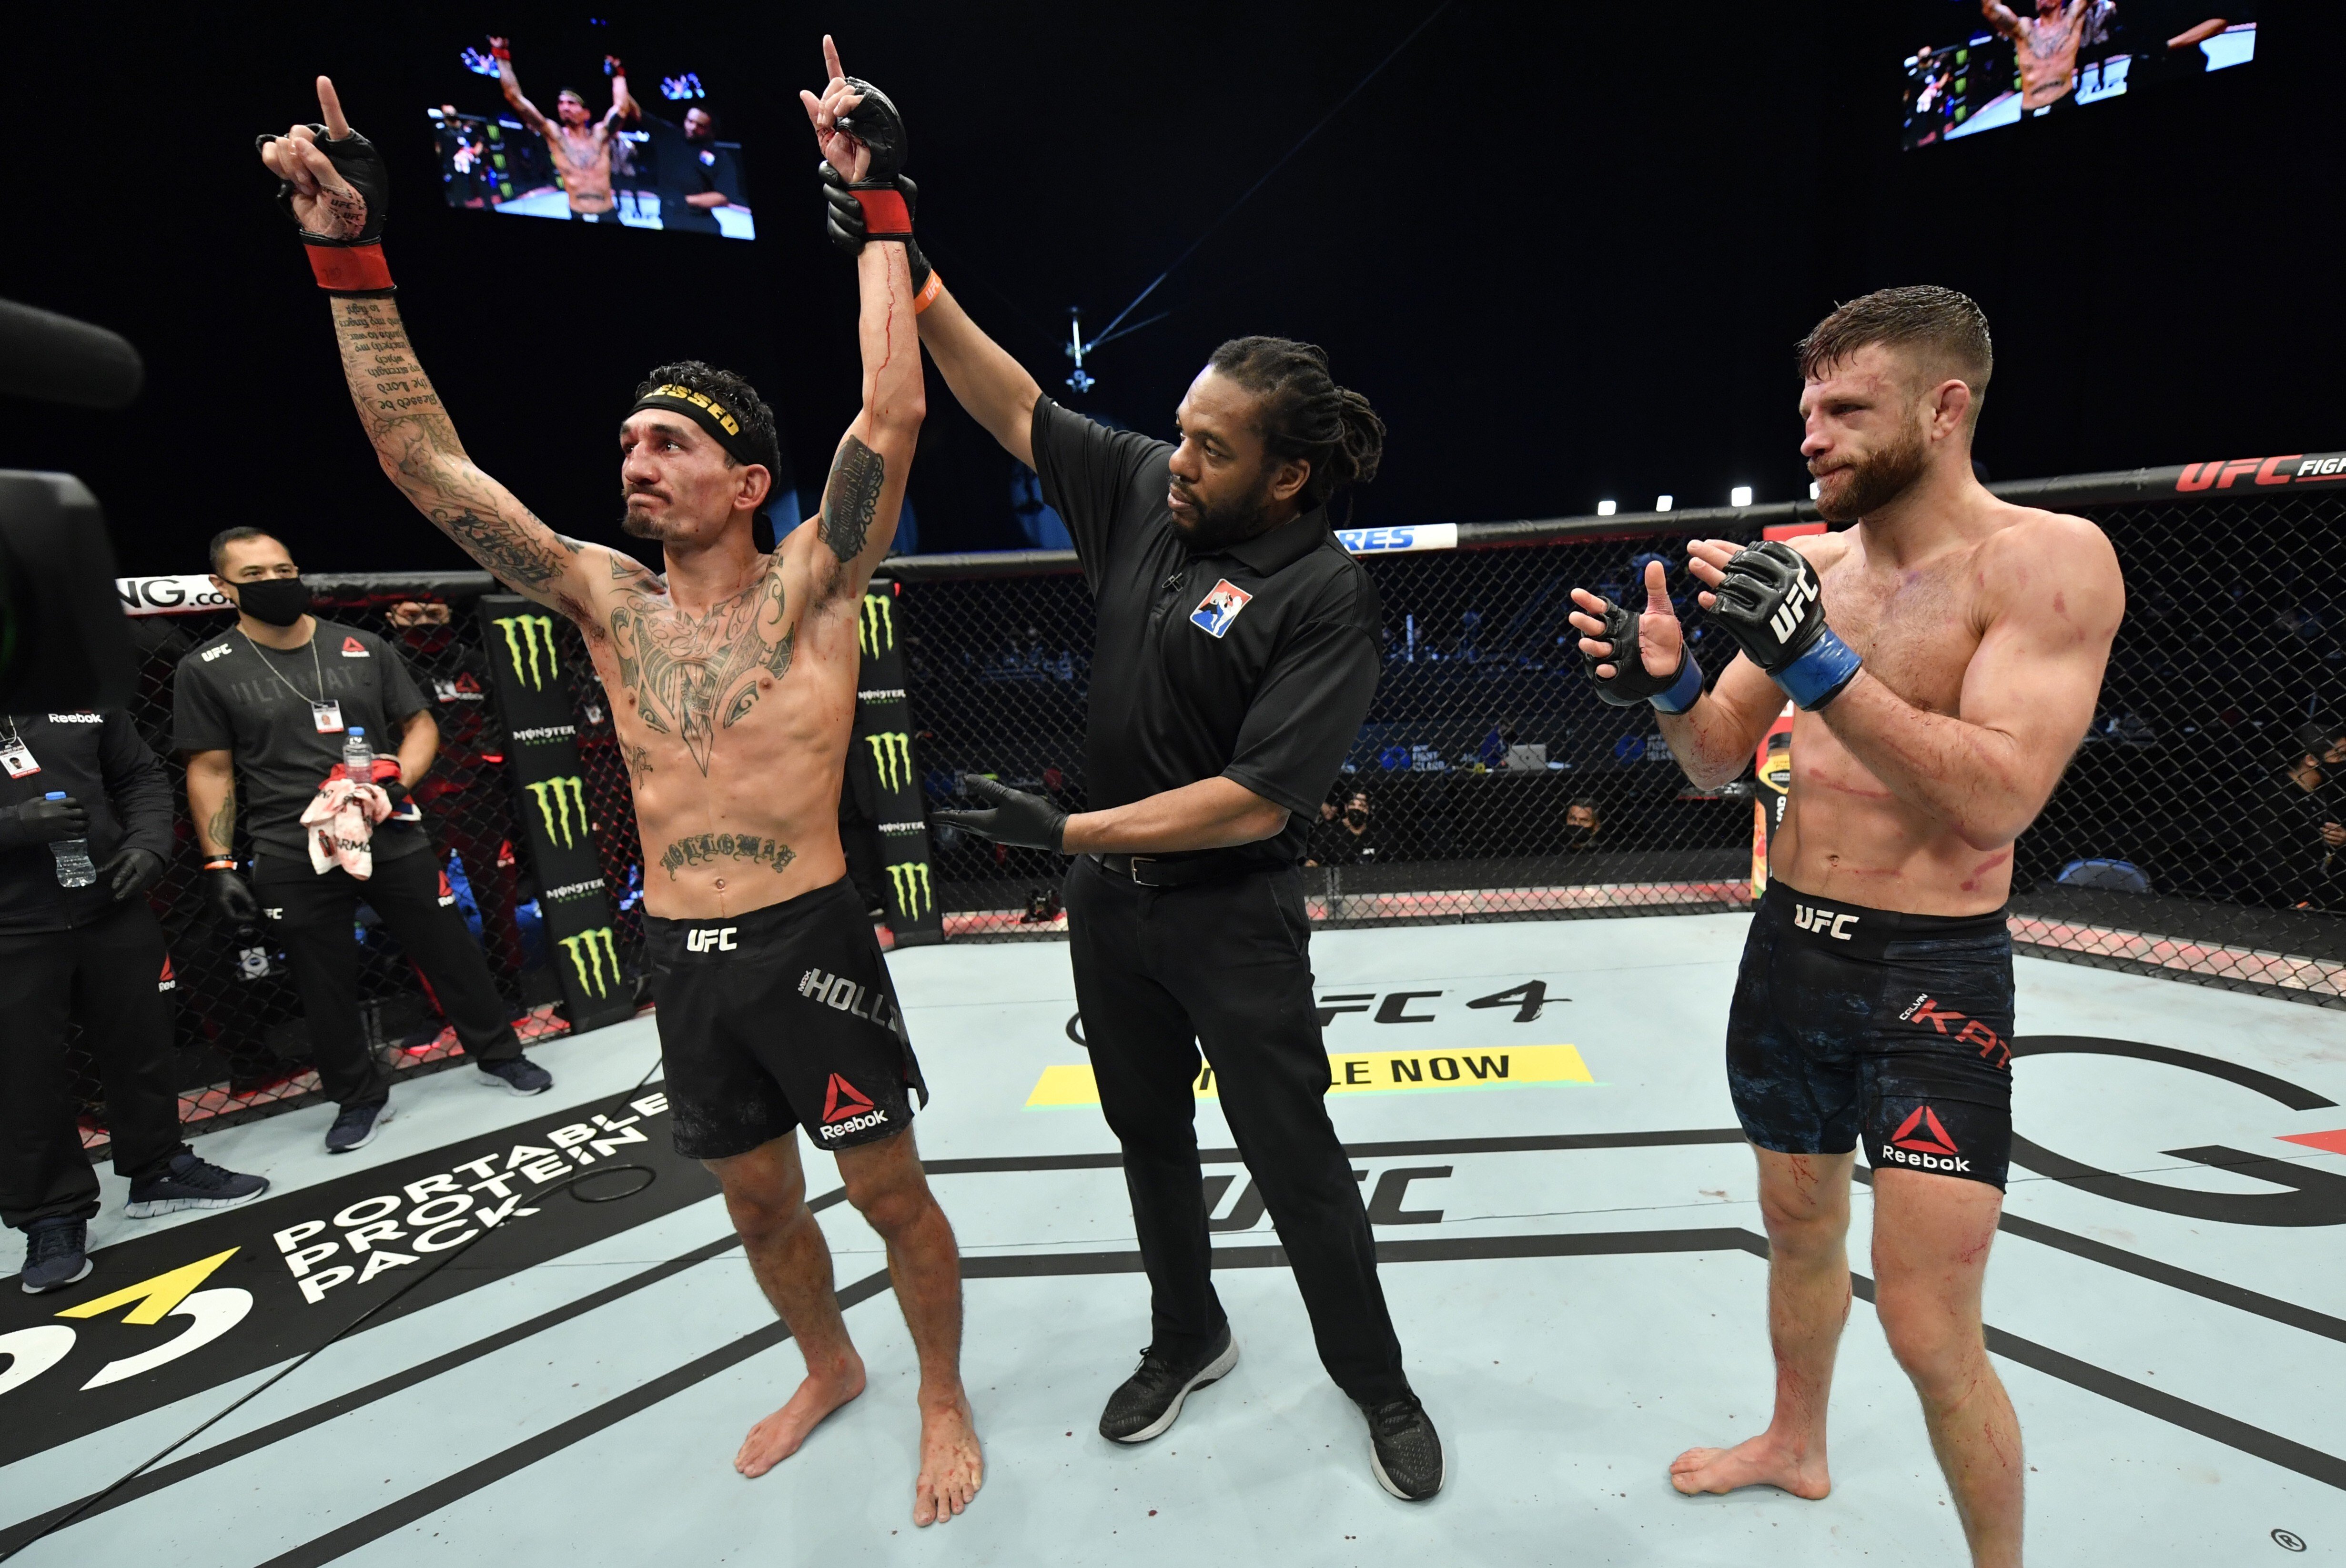 Max Holloway celebrates after his unanimous decision victory over Calvin Kattar in their featherweight main event at UFC Fight Island 7 inside the Etihad Arena on January 17, 2021 in Abu Dhabi. Photos: Jeff Bottari/Zuffa LLC